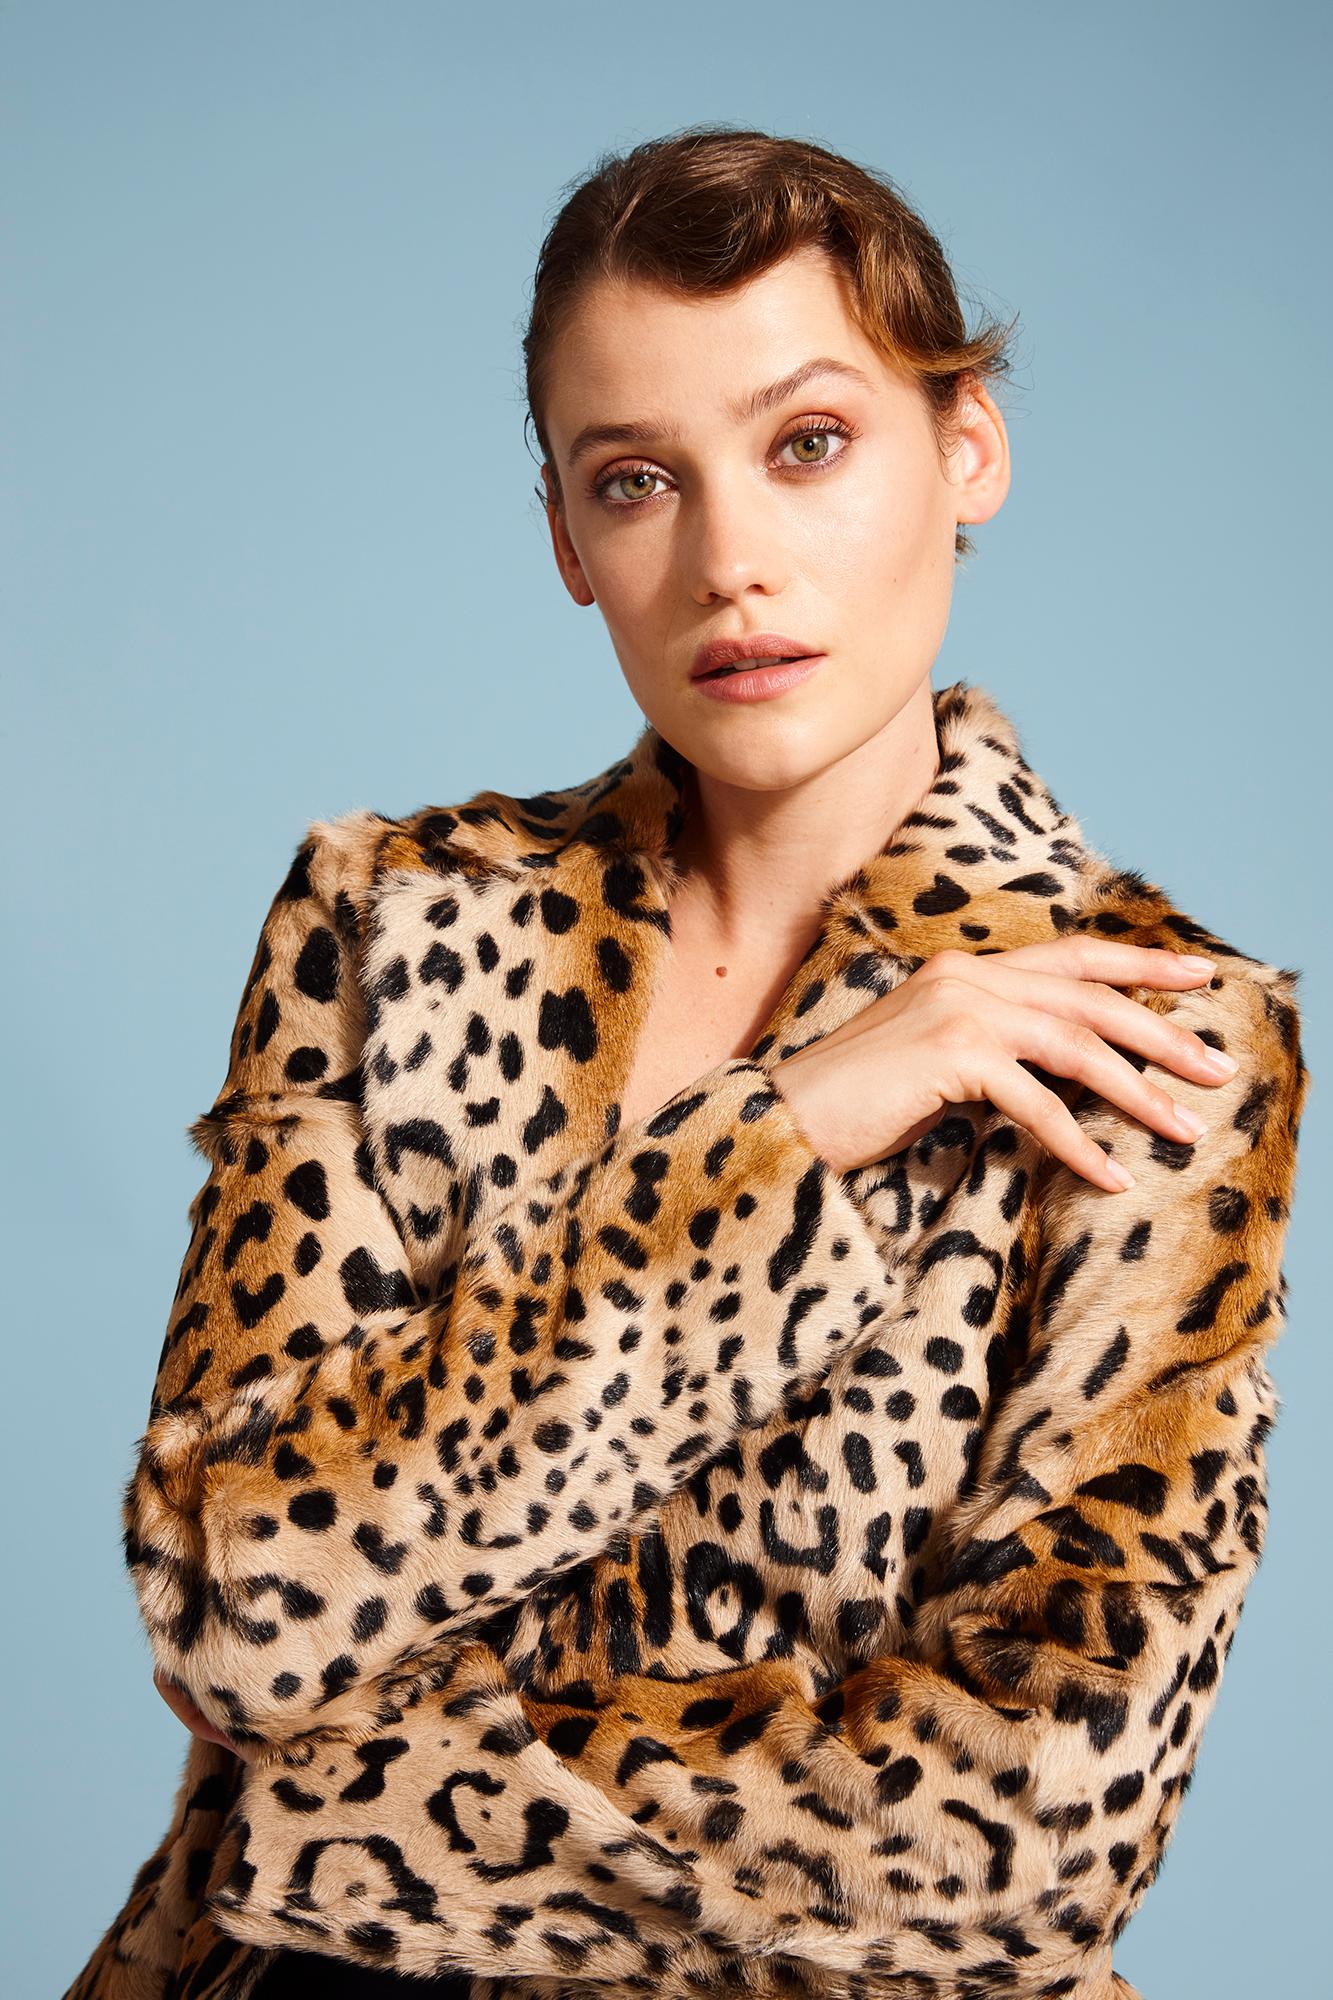 This Leopard print coat is Verheyen London’s classic staple for effortless style and glamour.
A coat for dressing up and down with jeans or a dress.

PRODUCT DETAILS

High Collar Leopard Print Coat

Size: UK 10-12
Colour: Natural

Dyed Printed Goat